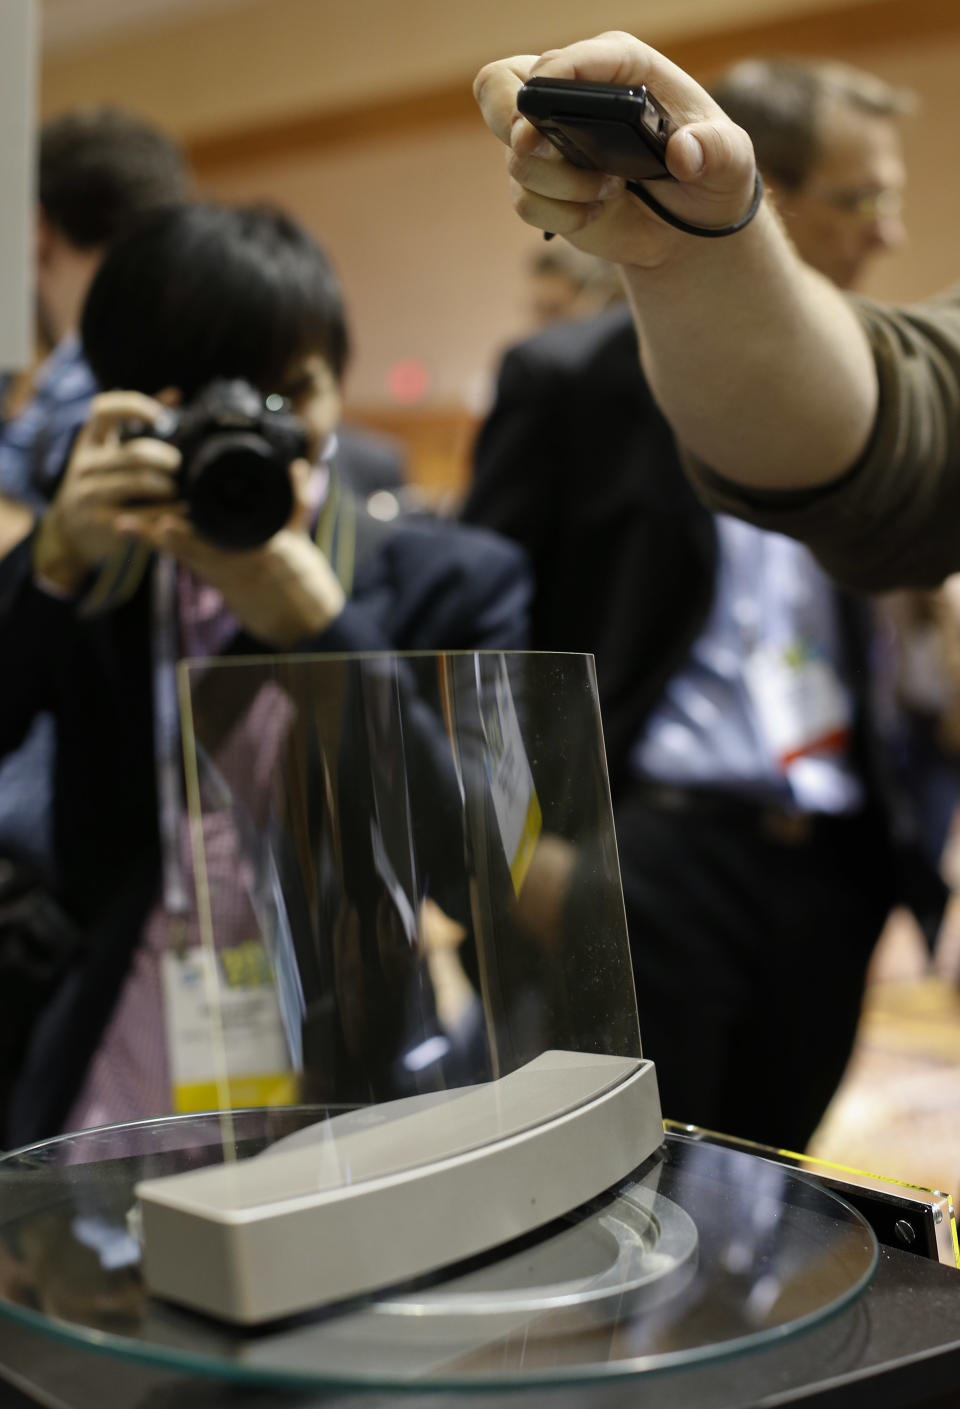 Members of the media photograph a glass speaker called Clio during the International Consumer Electronics Show, Sunday, Jan. 5, 2014, in Las Vegas. The speaker, produced by ClearView Audio uses a single piece of curved millimeter-thick acrylic glass that sits on a dock which vibrates it in a finely tuned way so that it can play music. It works with Bluetooth streaming and with a 3.5 millimeter jack. (AP Photo/Julie Jacobson)